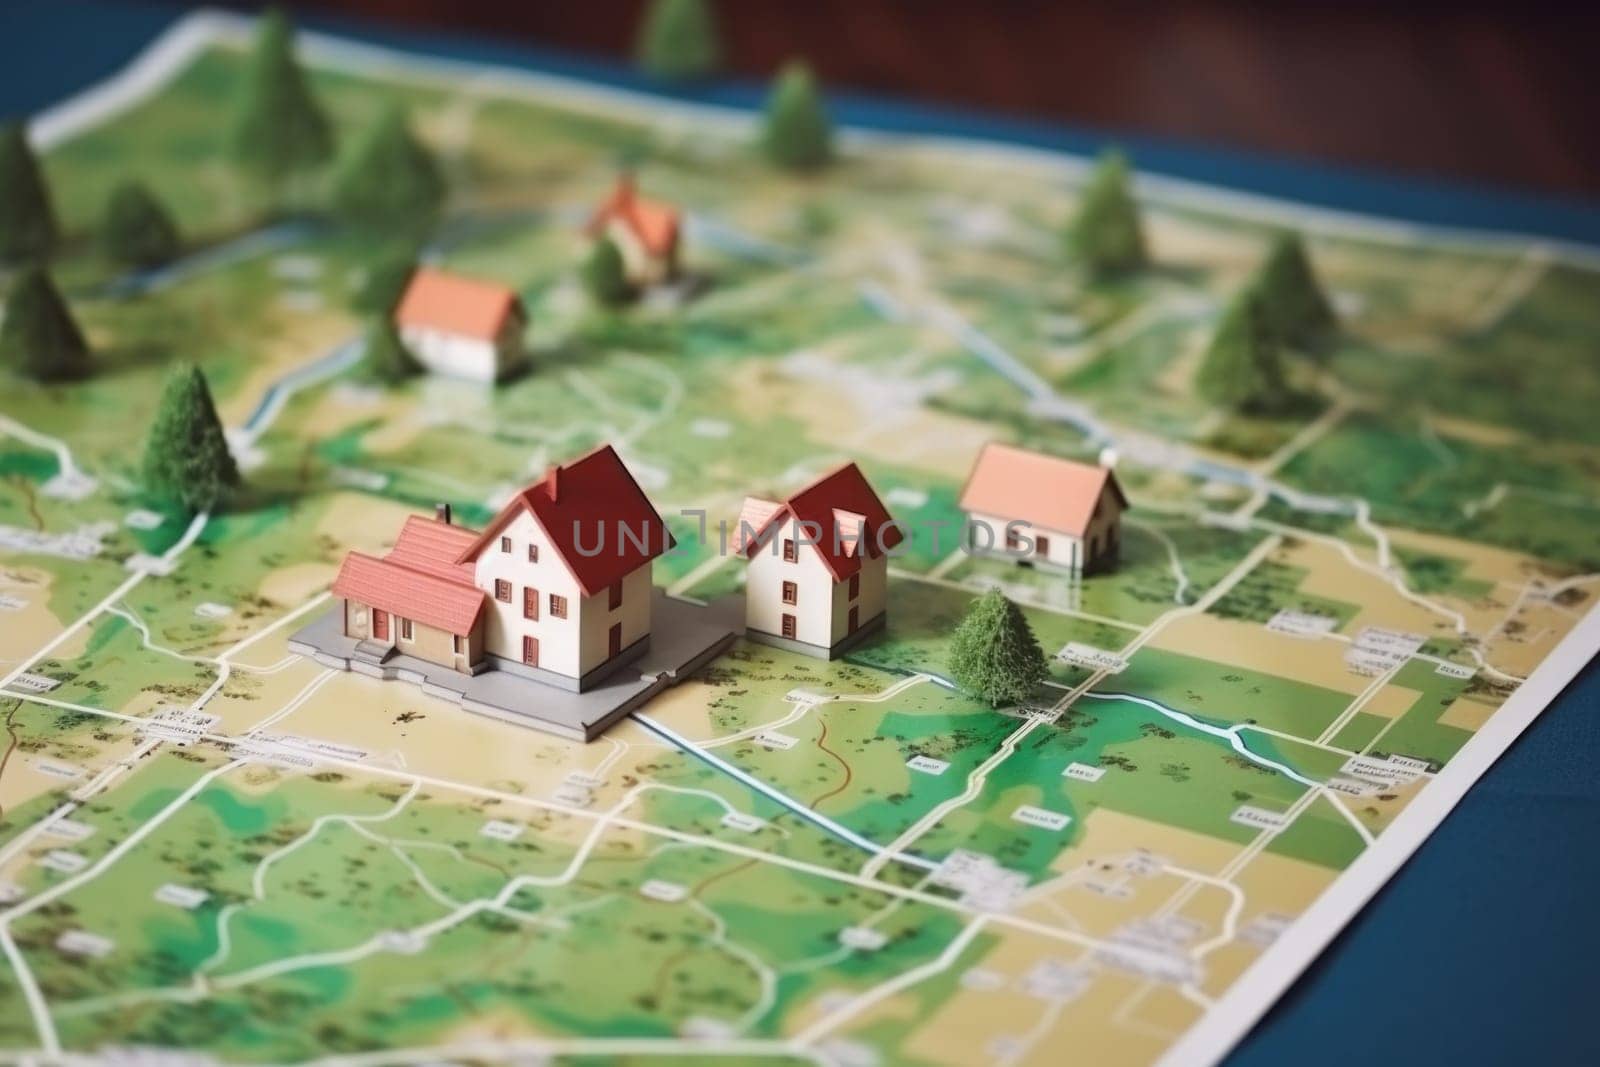 Photo of Small house model on map brochure paper.